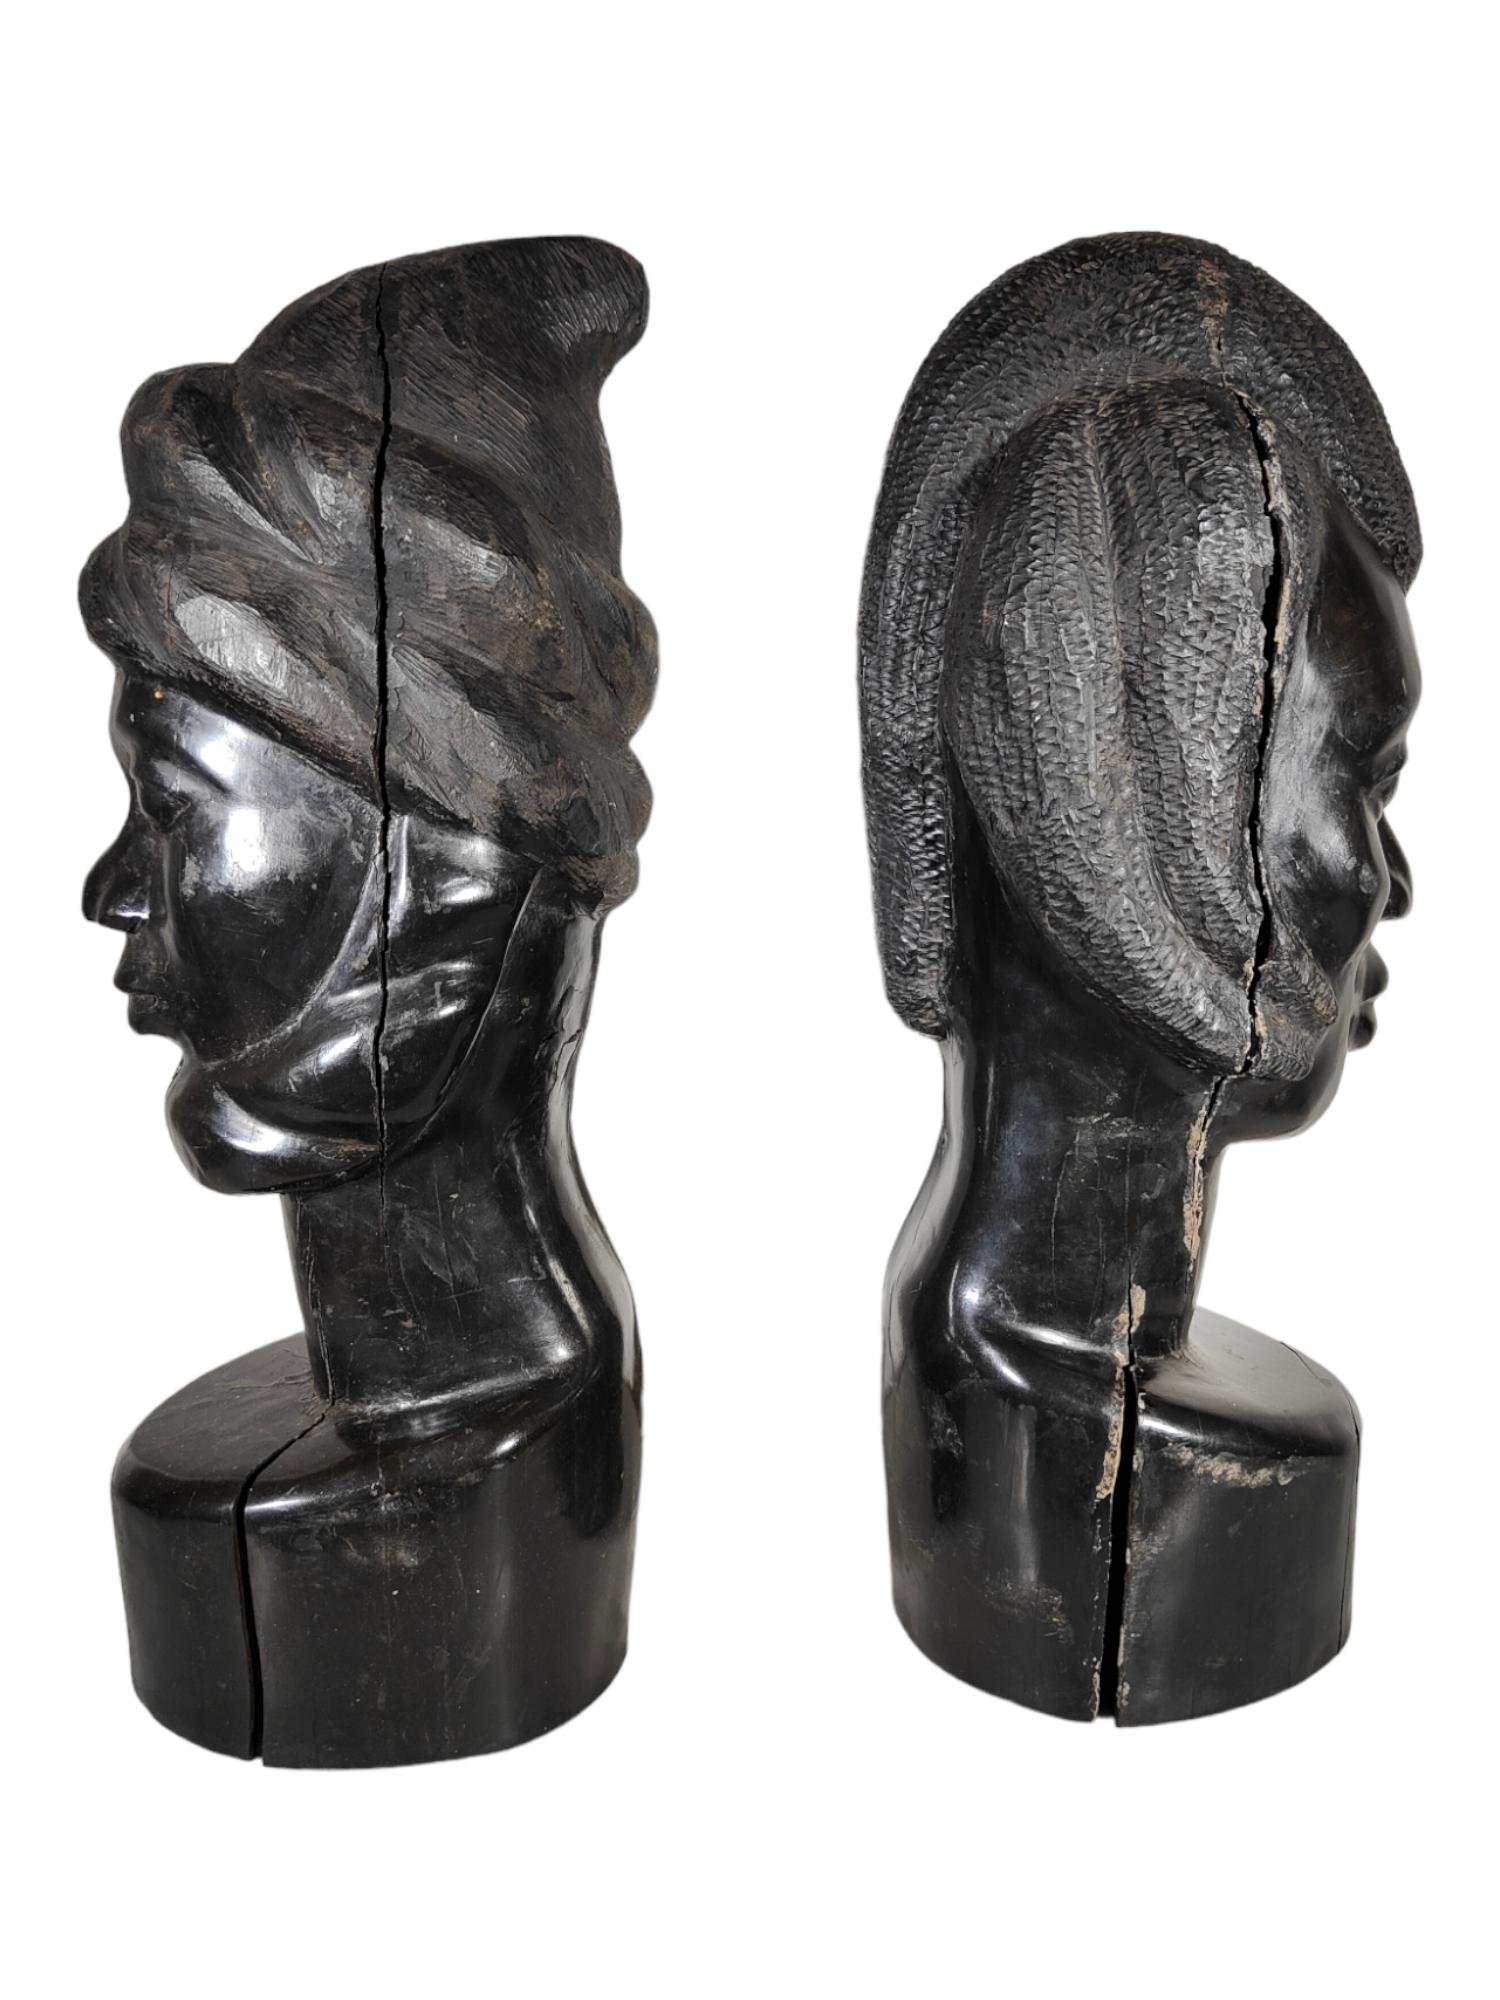 Mid-20th Century African Ebony Sculptures For Sale